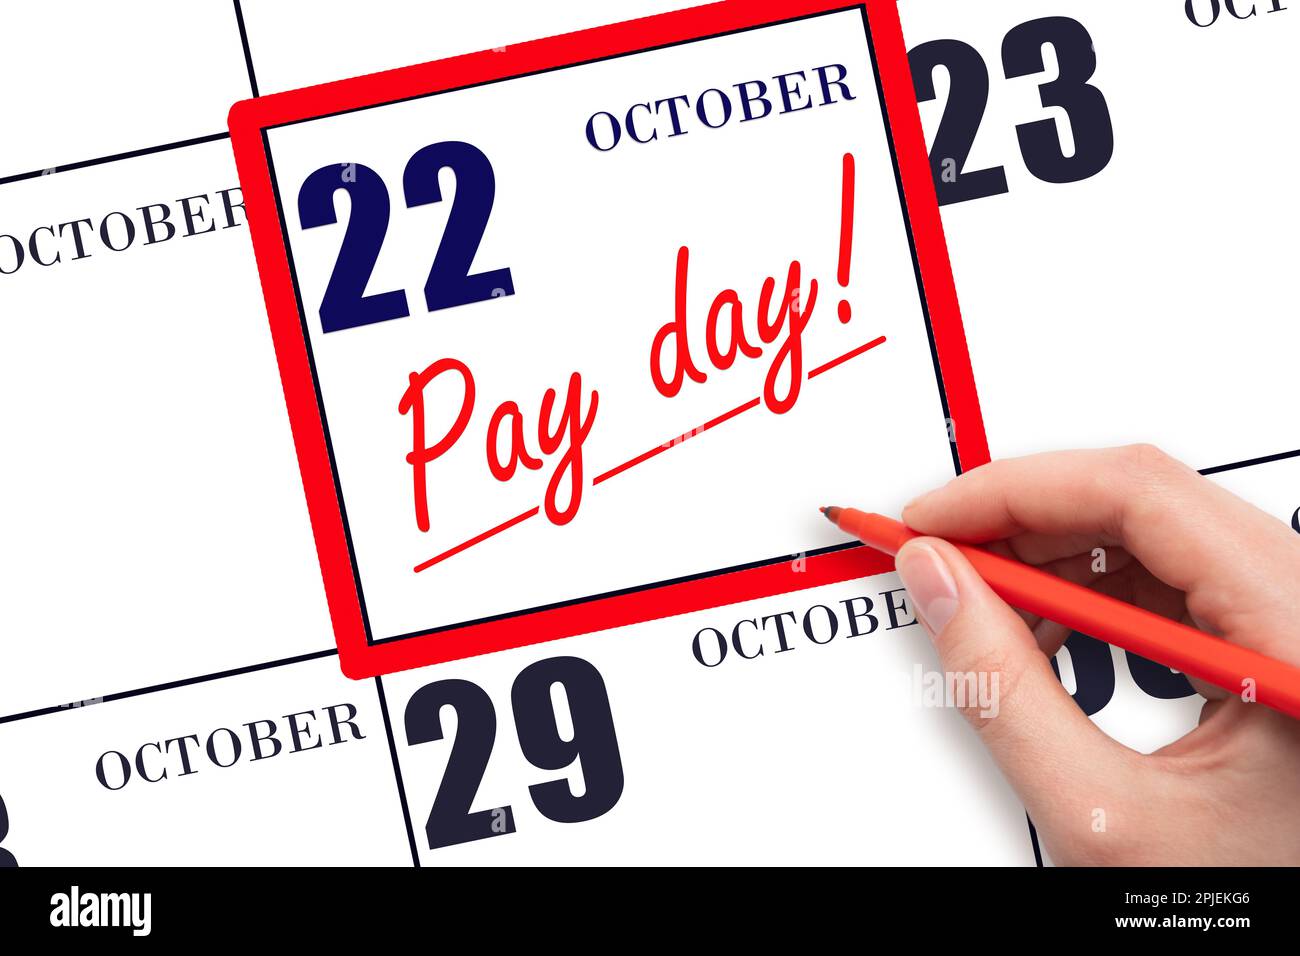 22nd day of October. Hand writing text PAY DATE on calendar date October 22 and underline it. Payment due date. Reminder concept of payment. Autumn mo Stock Photo